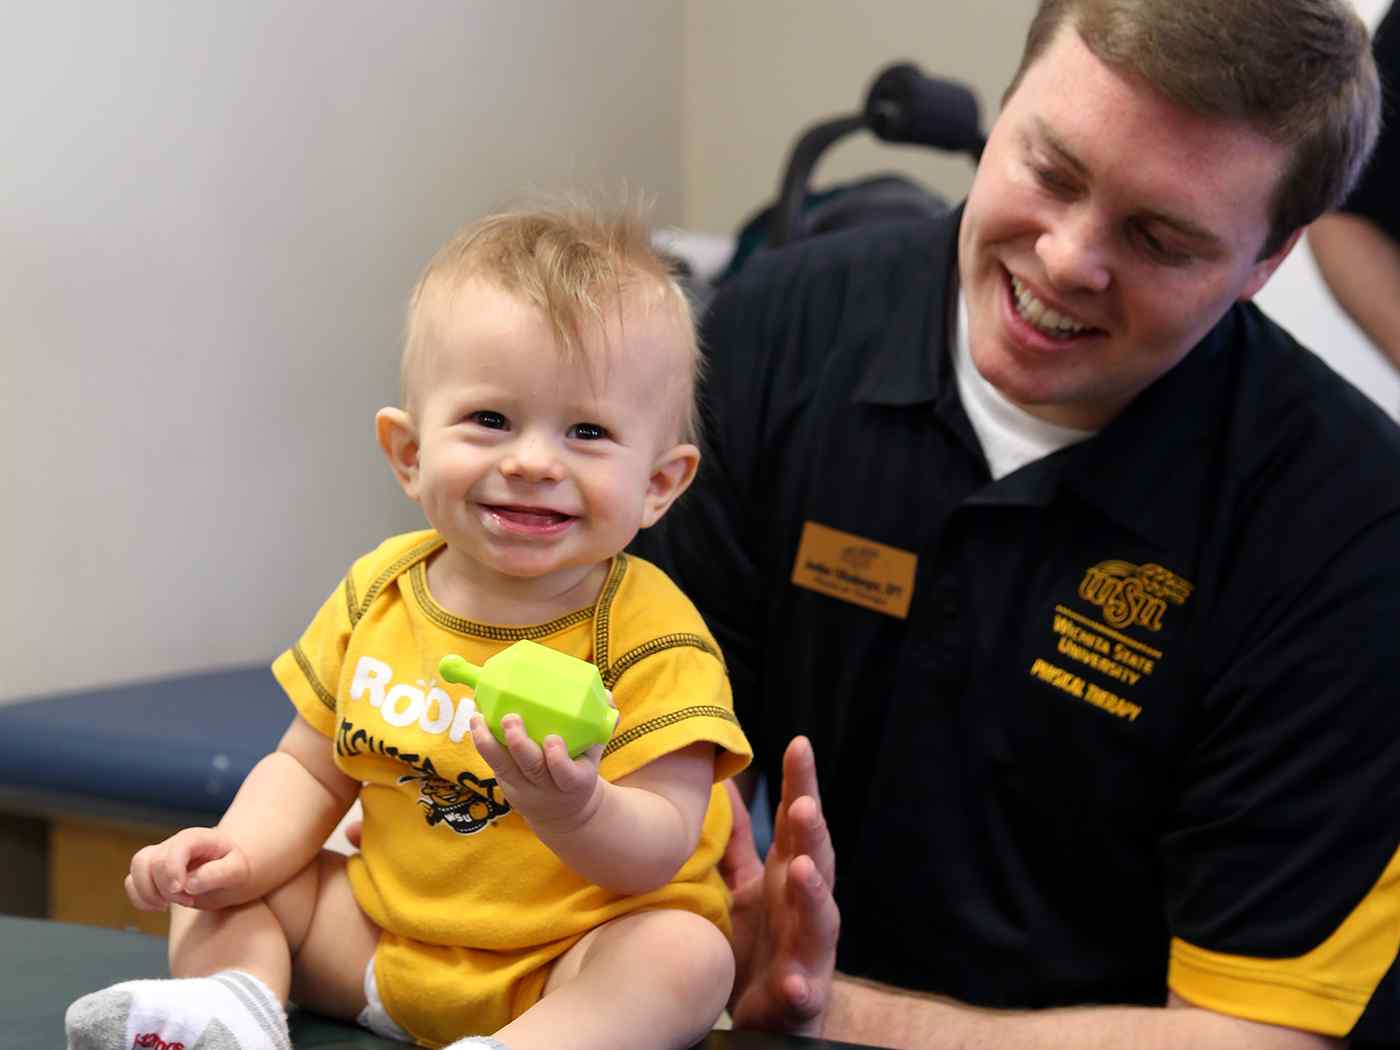 Baby smiling while playing with male WSU student.